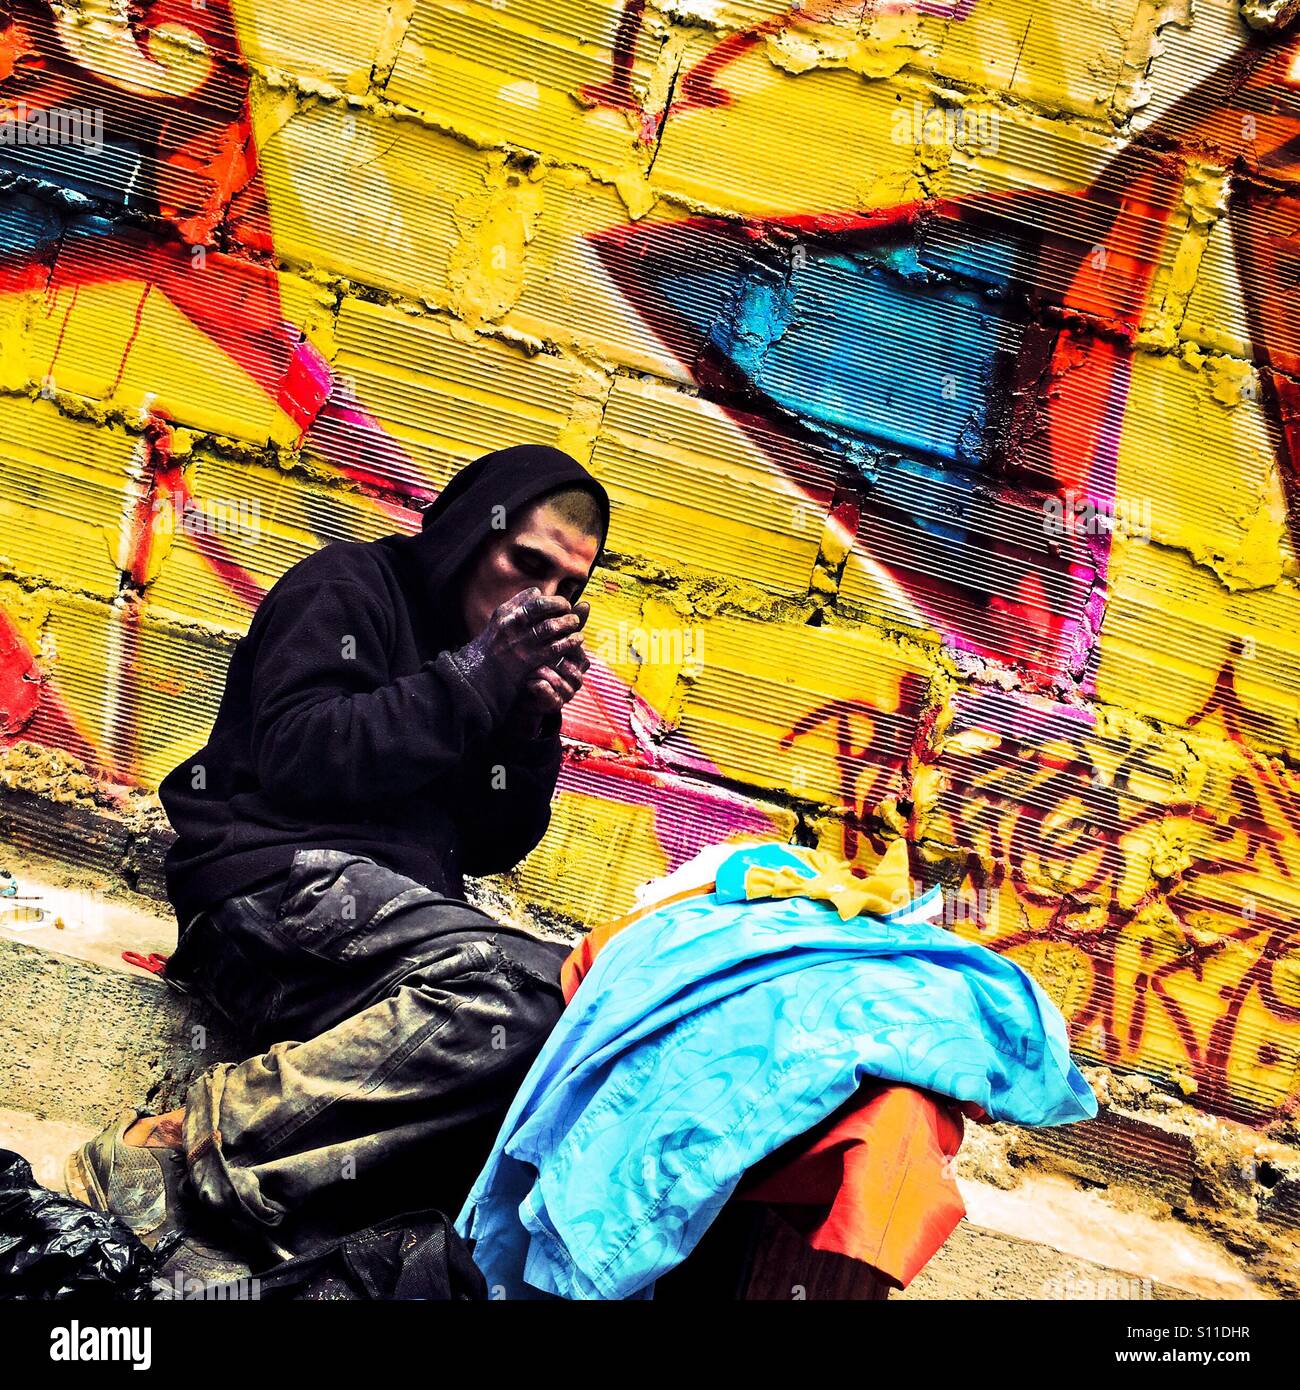 A Colombian drug addict smokes ‘basuco’ (raw cocaine paste) in front the wall, covered in graffiti artwork in the center of Bogotá, Colombia, 15 February, 2016. Stock Photo